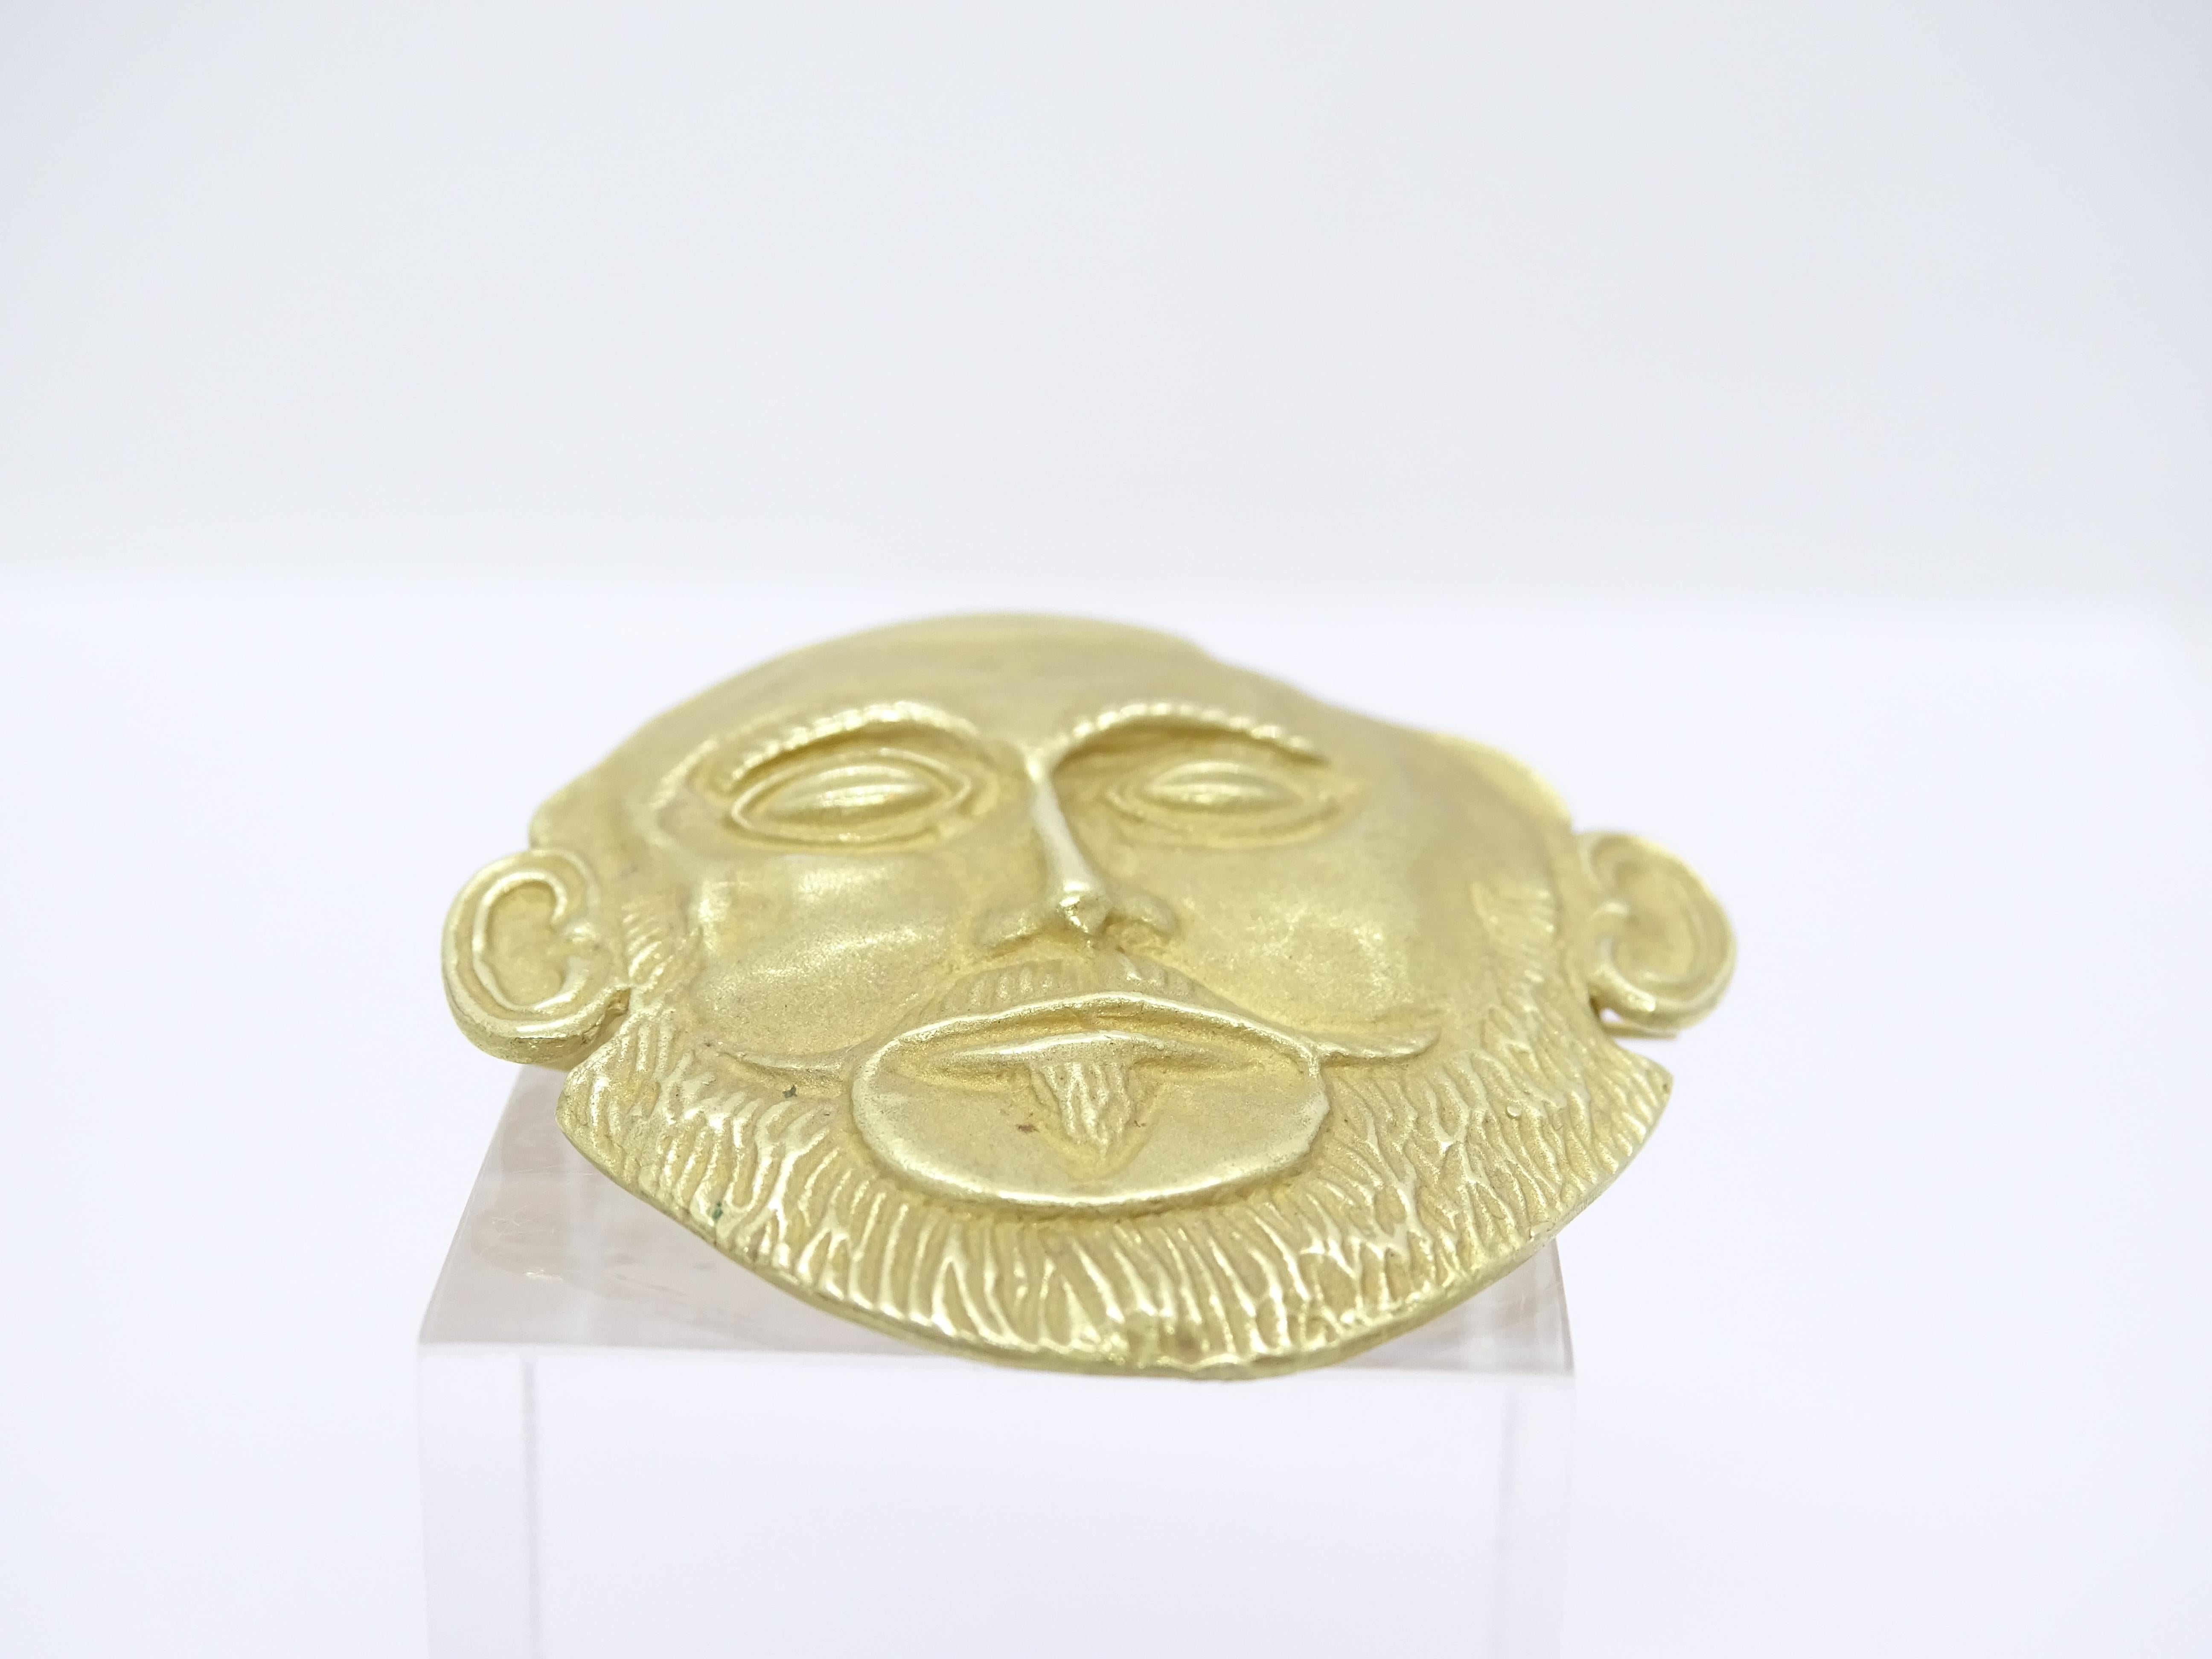 Brooch / Pendant “Mask of Agamemnon”, 18k gold, 90's For Sale 12